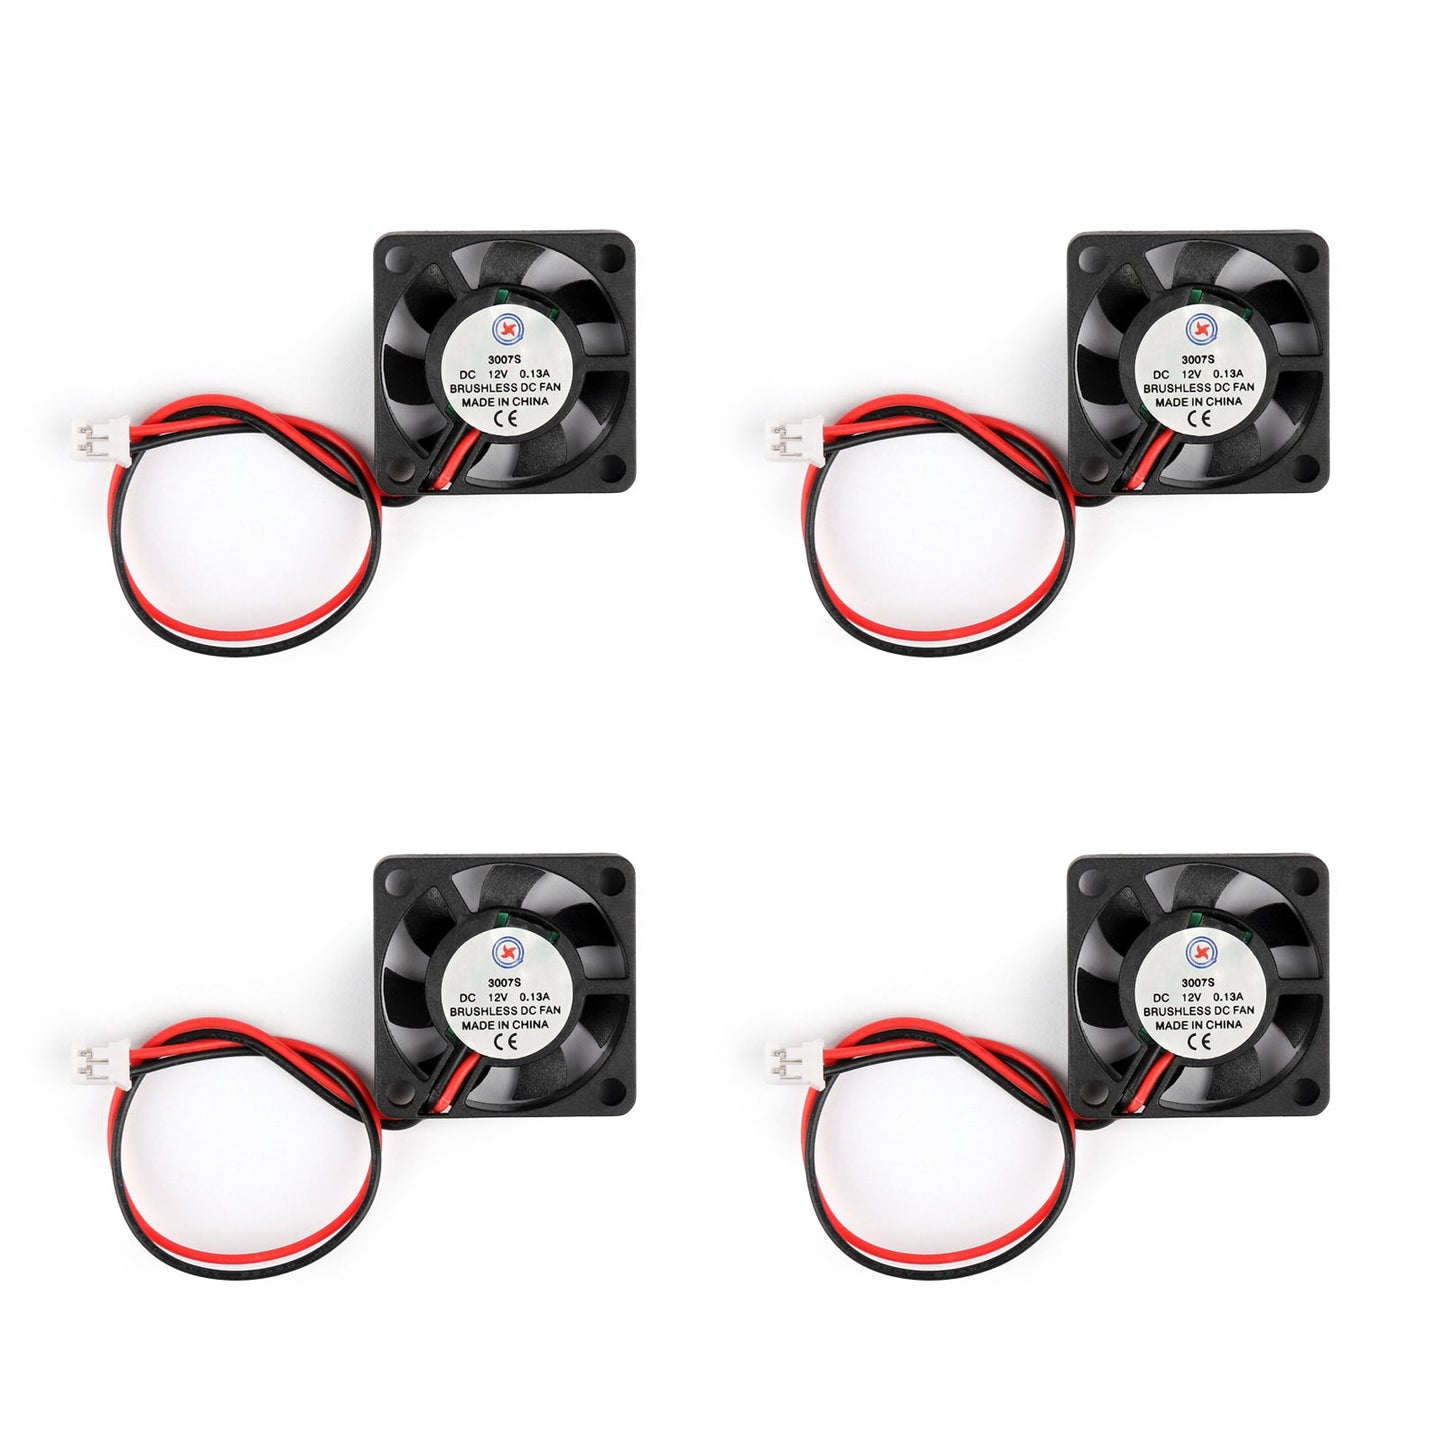 4Pcs DC BrushleS Cooling PC Computer Fan 12V 3007S 30x30x7mm 0.13A 2 Pin Wire